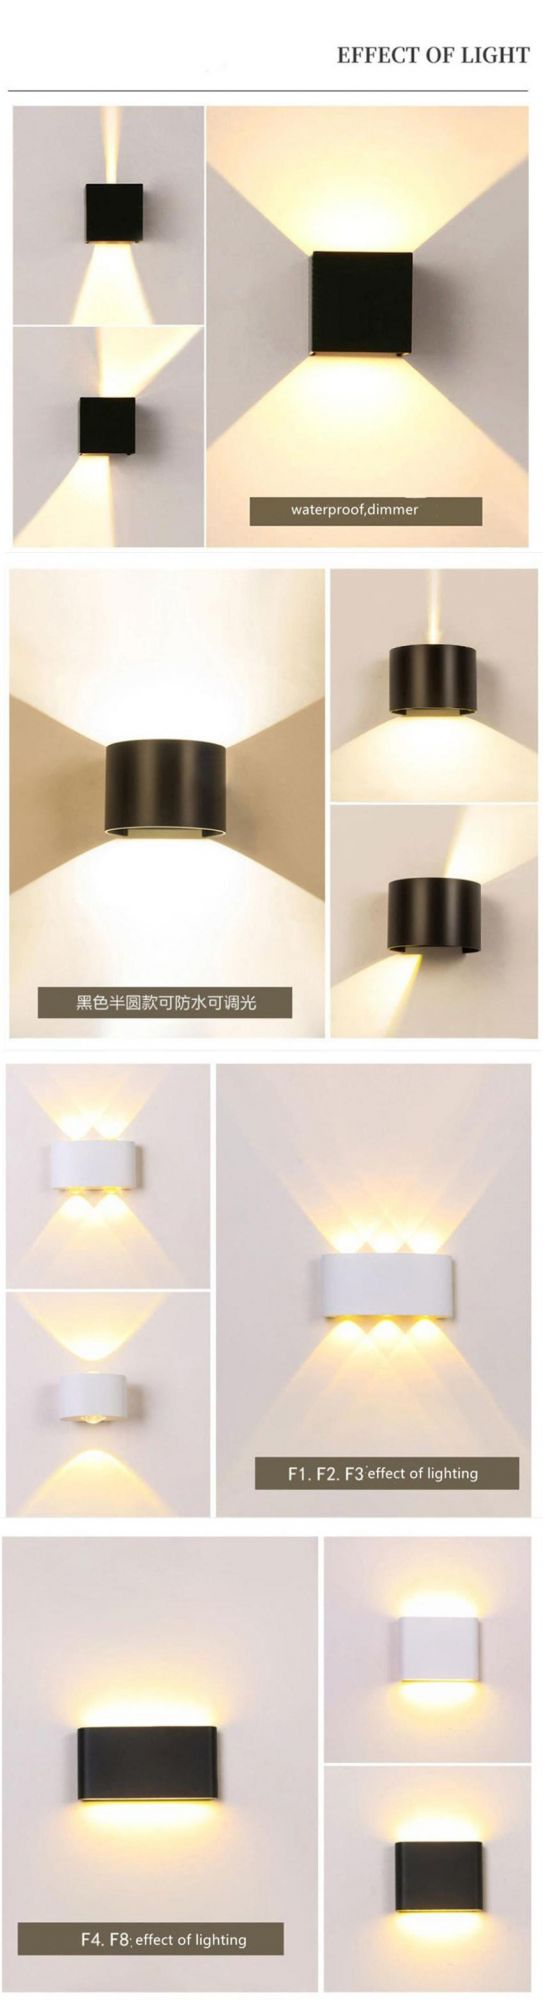 6W LED Home Decoration Wall Lamp Light for Indoor Outdoor